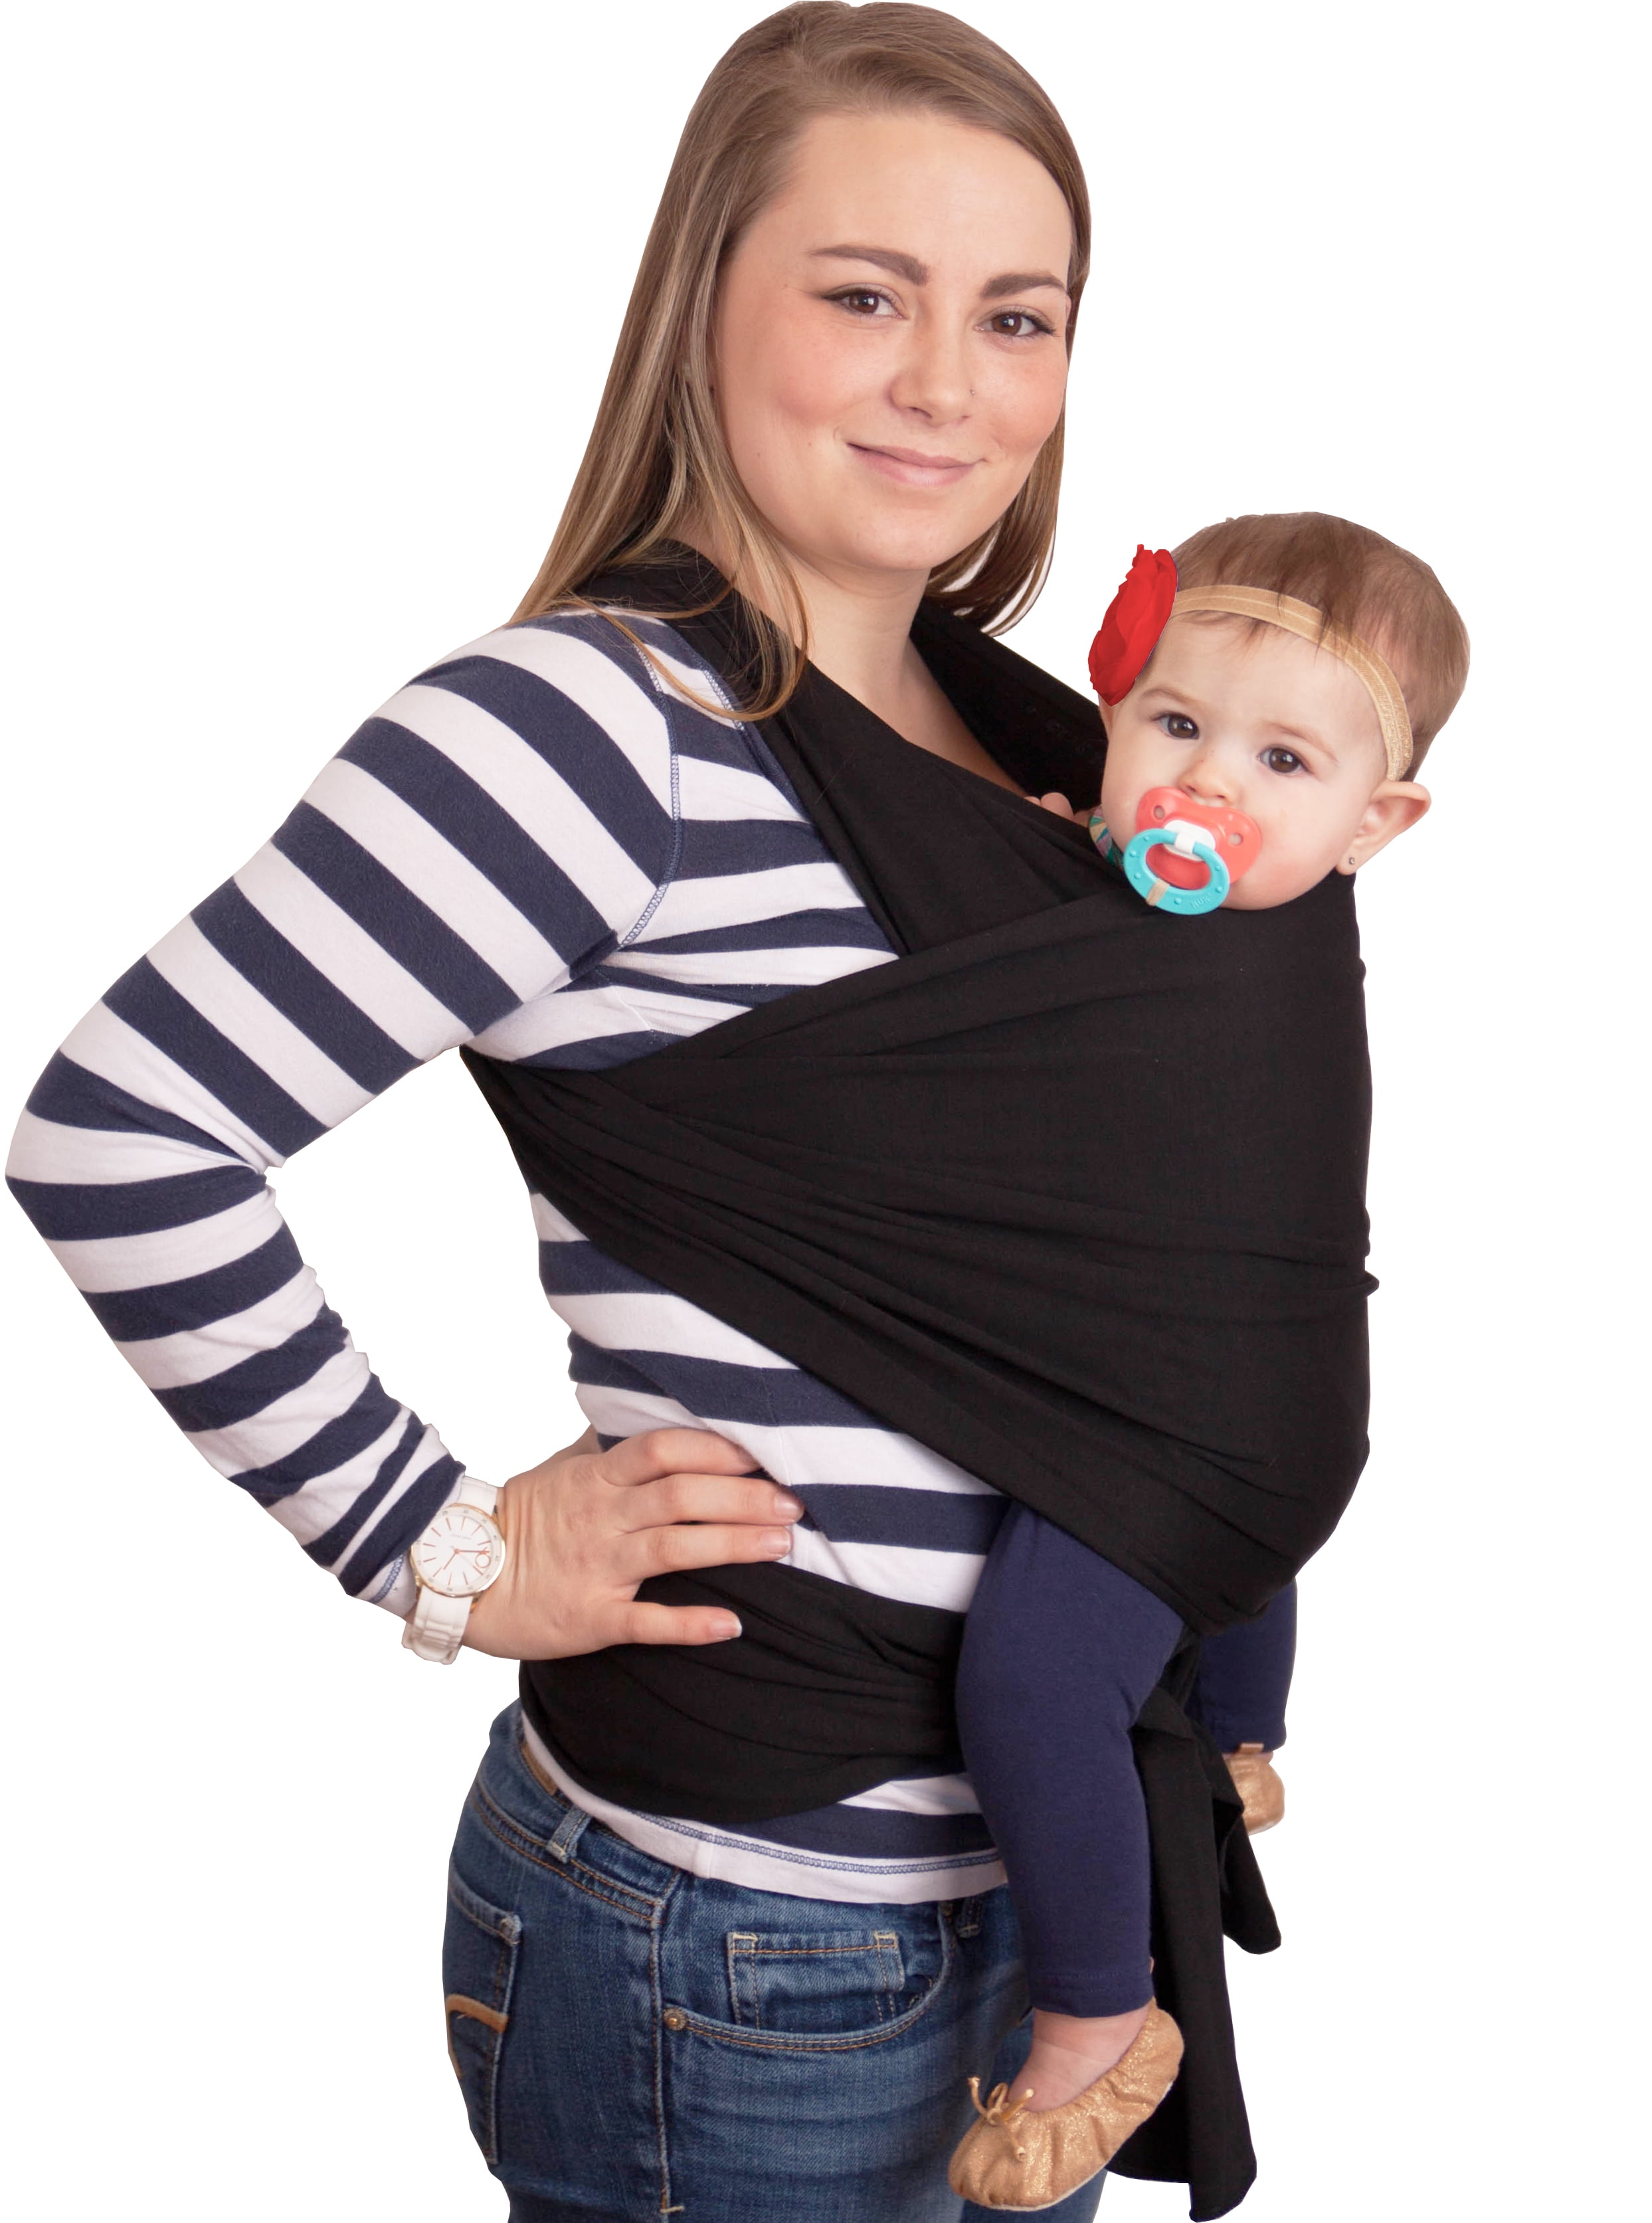 9-in-1 CuddleBug Baby Wrap Sling Newborns & Toddlers up to 36 lbs Carrier 